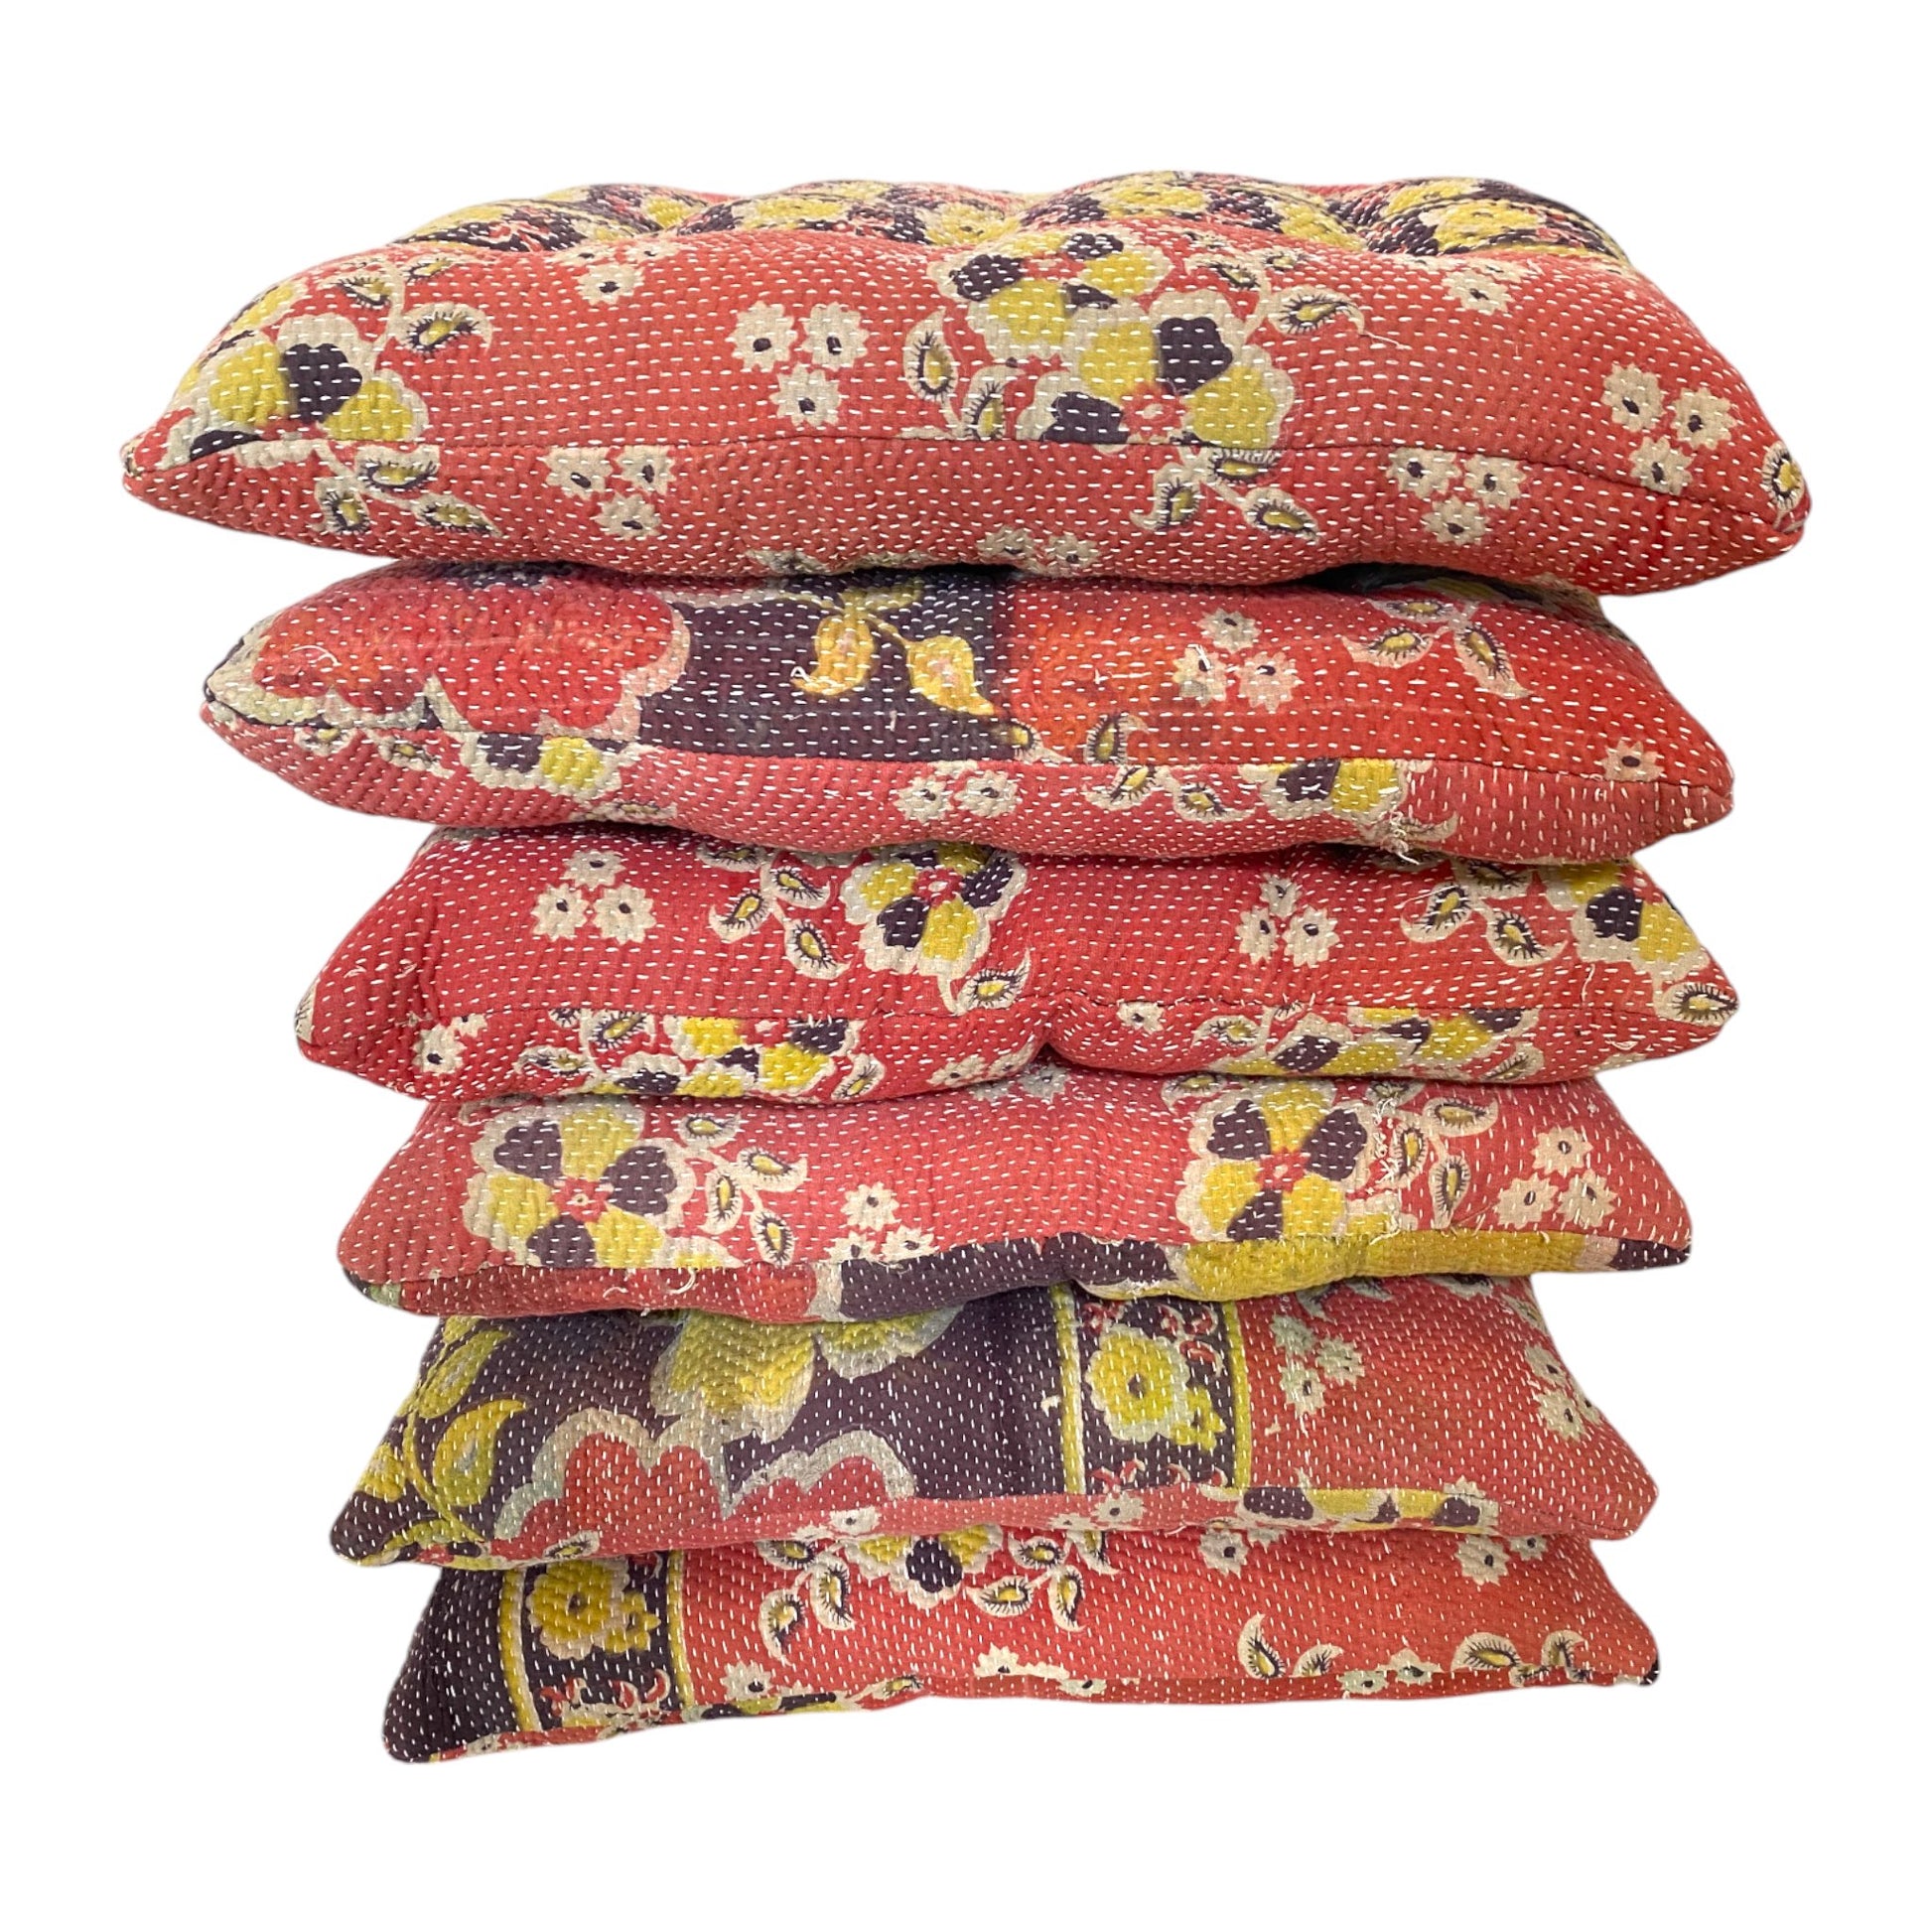 Red floral kantha seat cushions